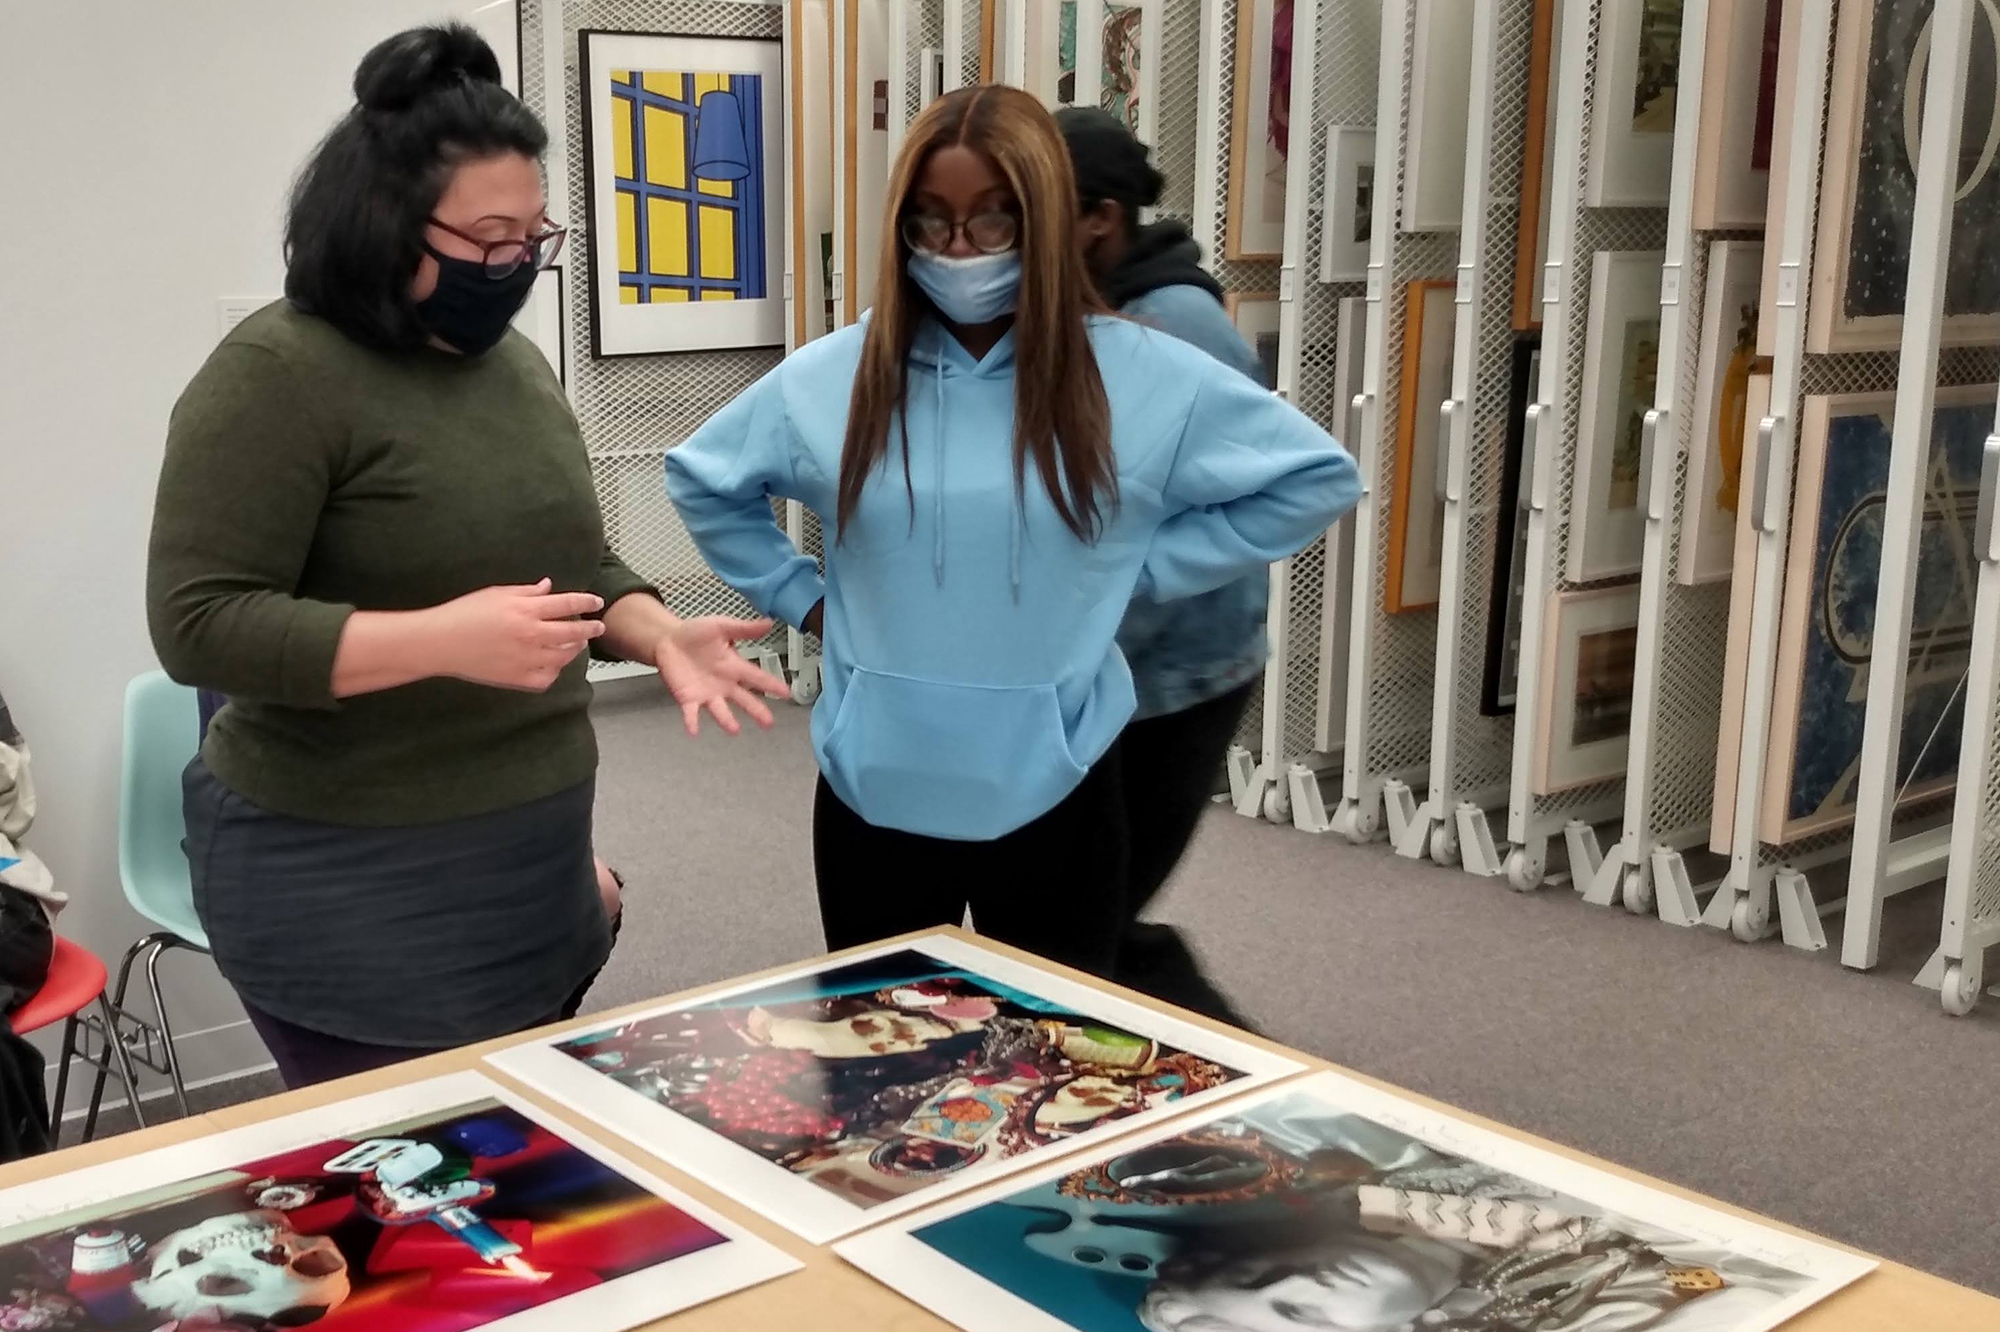 Students looking at photographs by Audrey Flack.